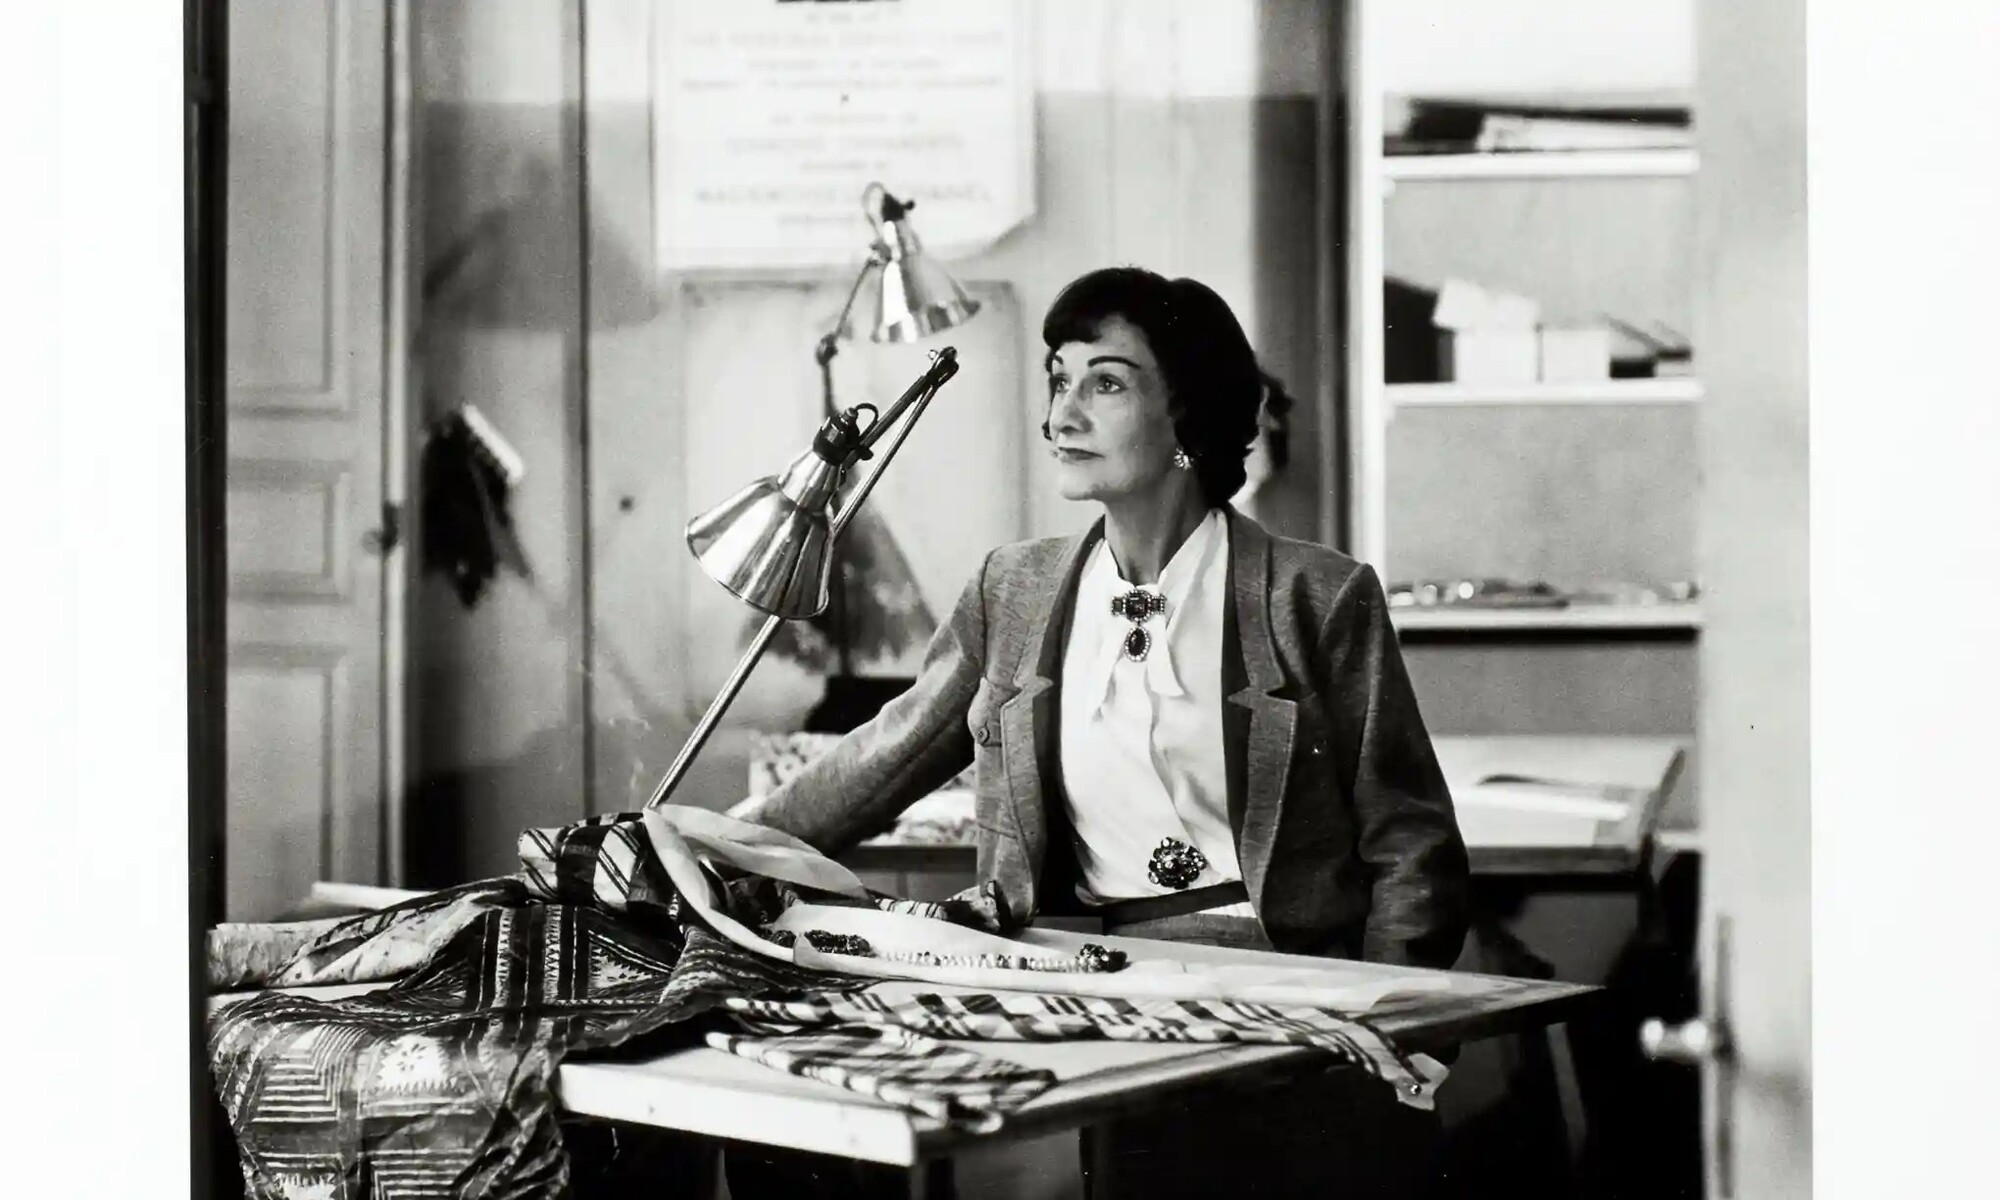 Gabrielle ‘Coco’ Chanel at work in 1953. Photograph: Henry Clarke/Chanel/Palais Galliera